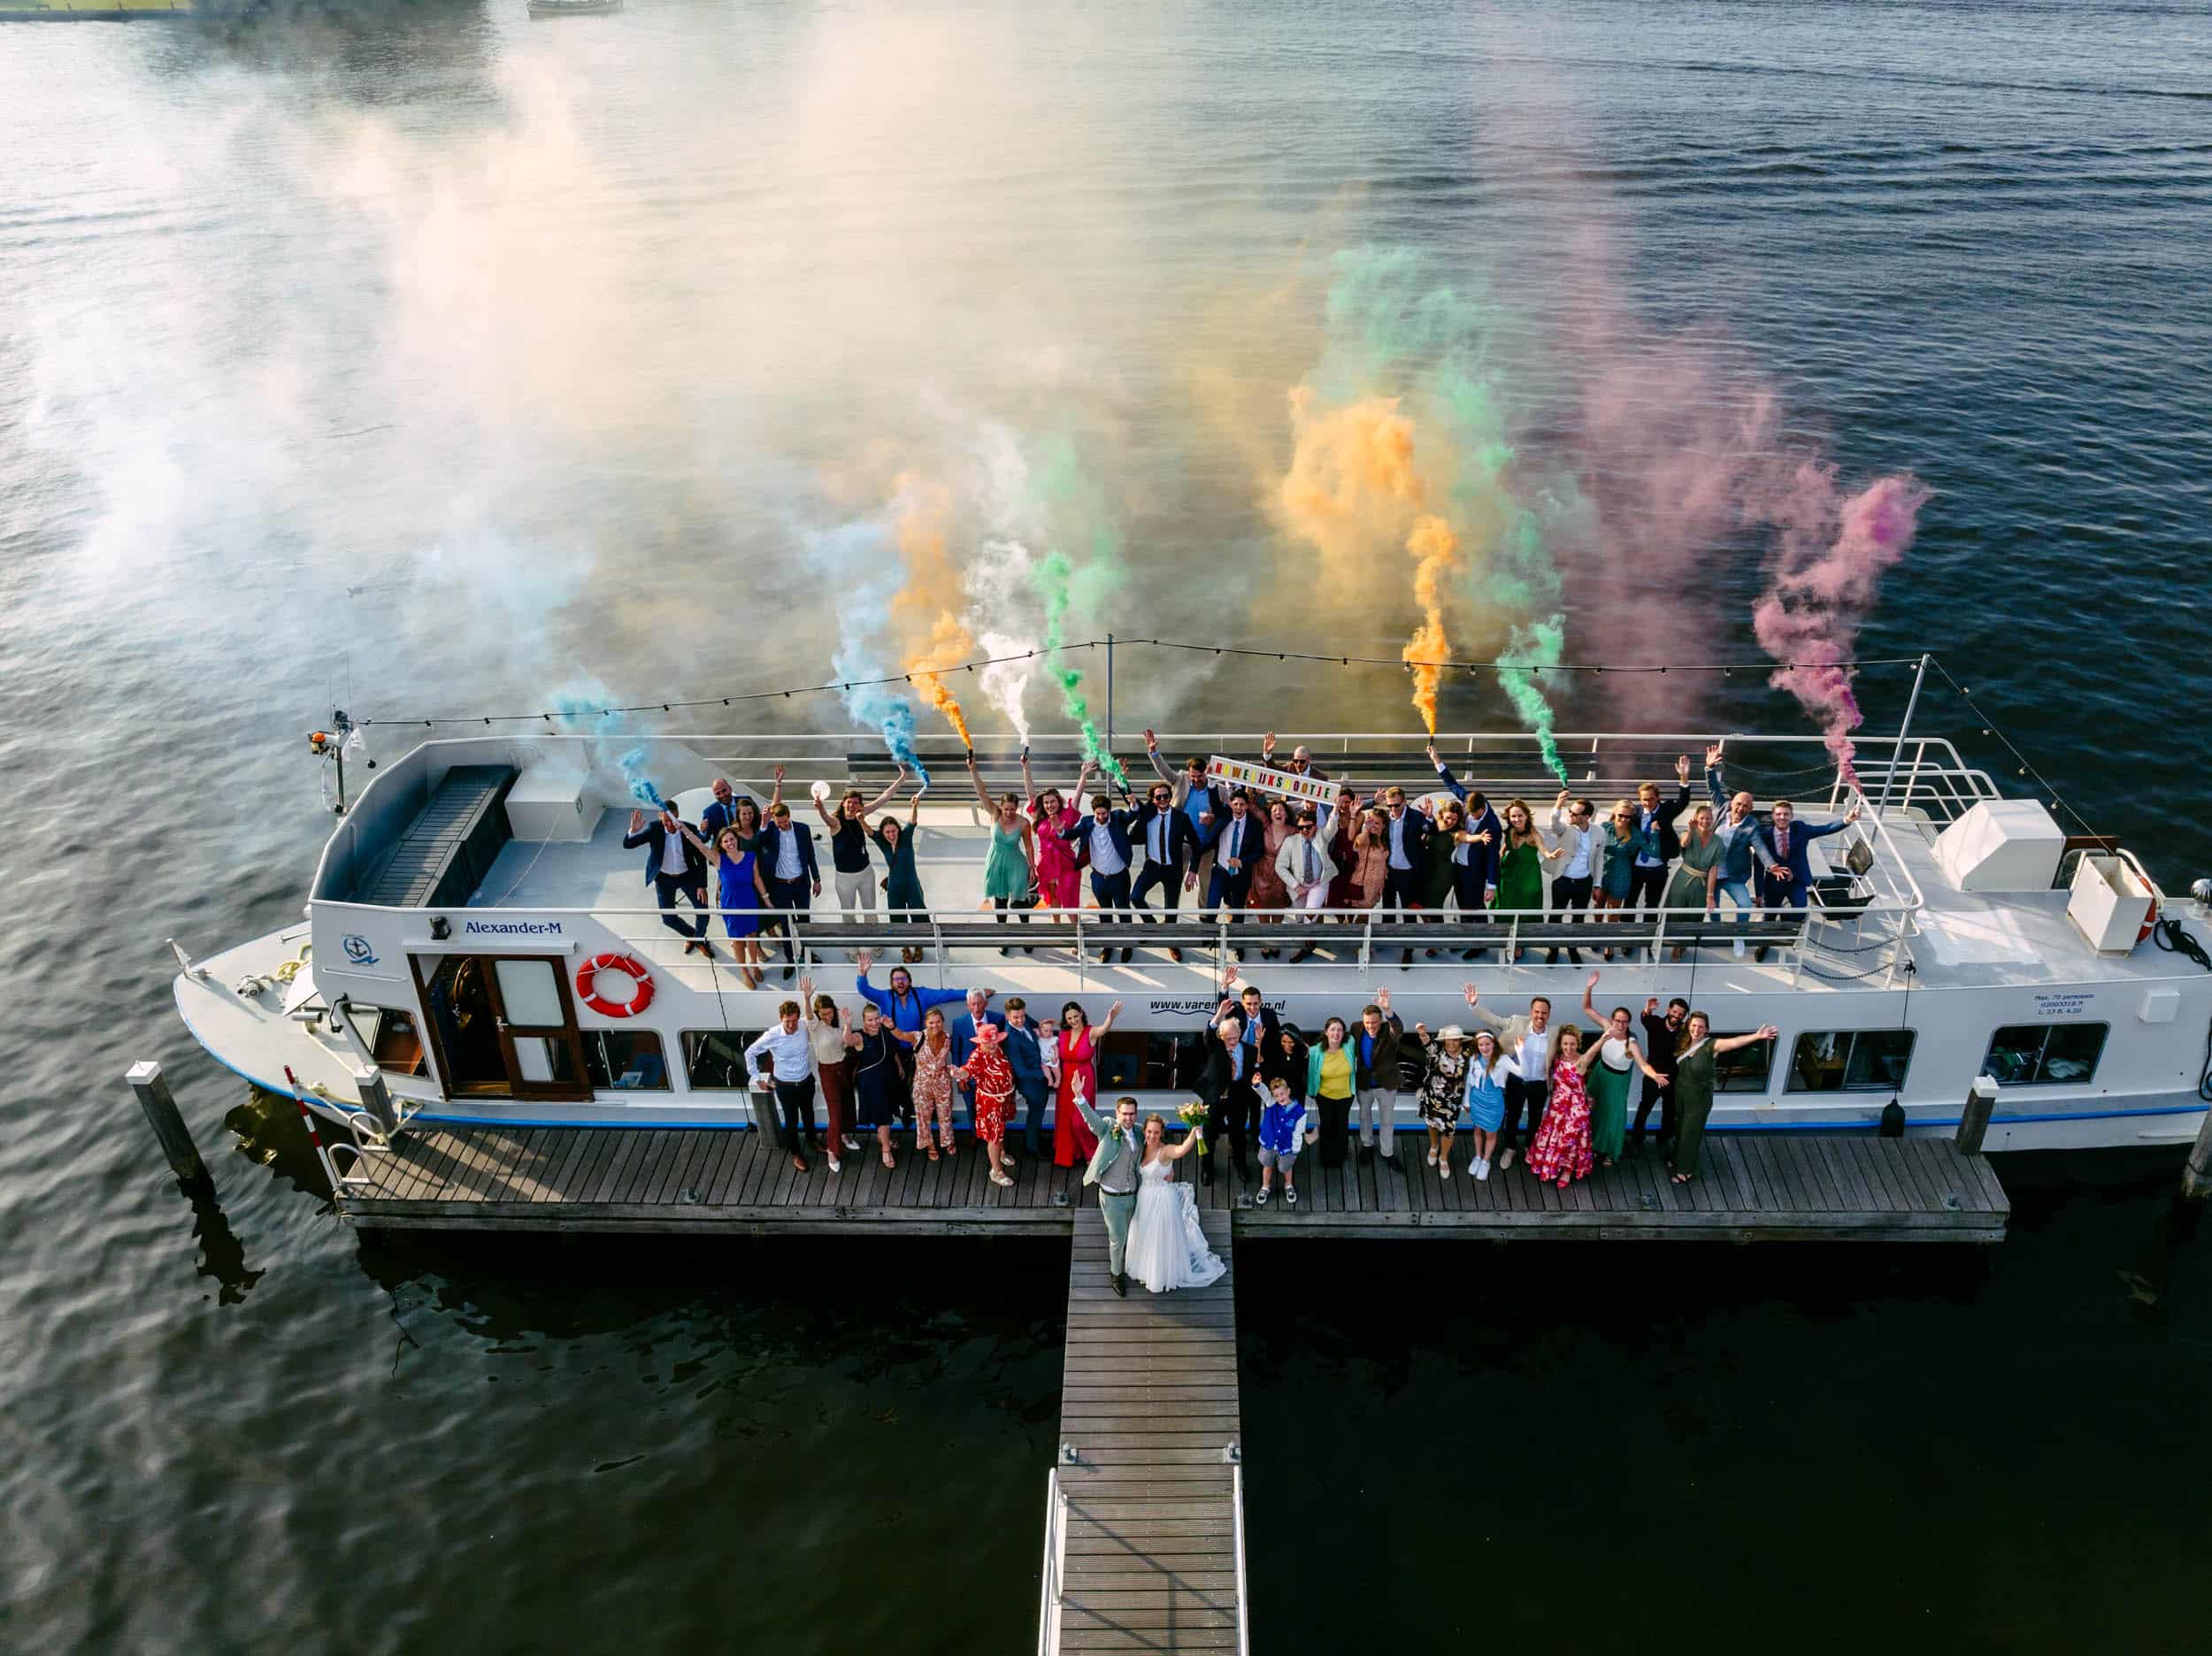 A group of people standing on a boat during the perfect wedding party, with coloured smoke creating a beautiful wedding photographer moment.